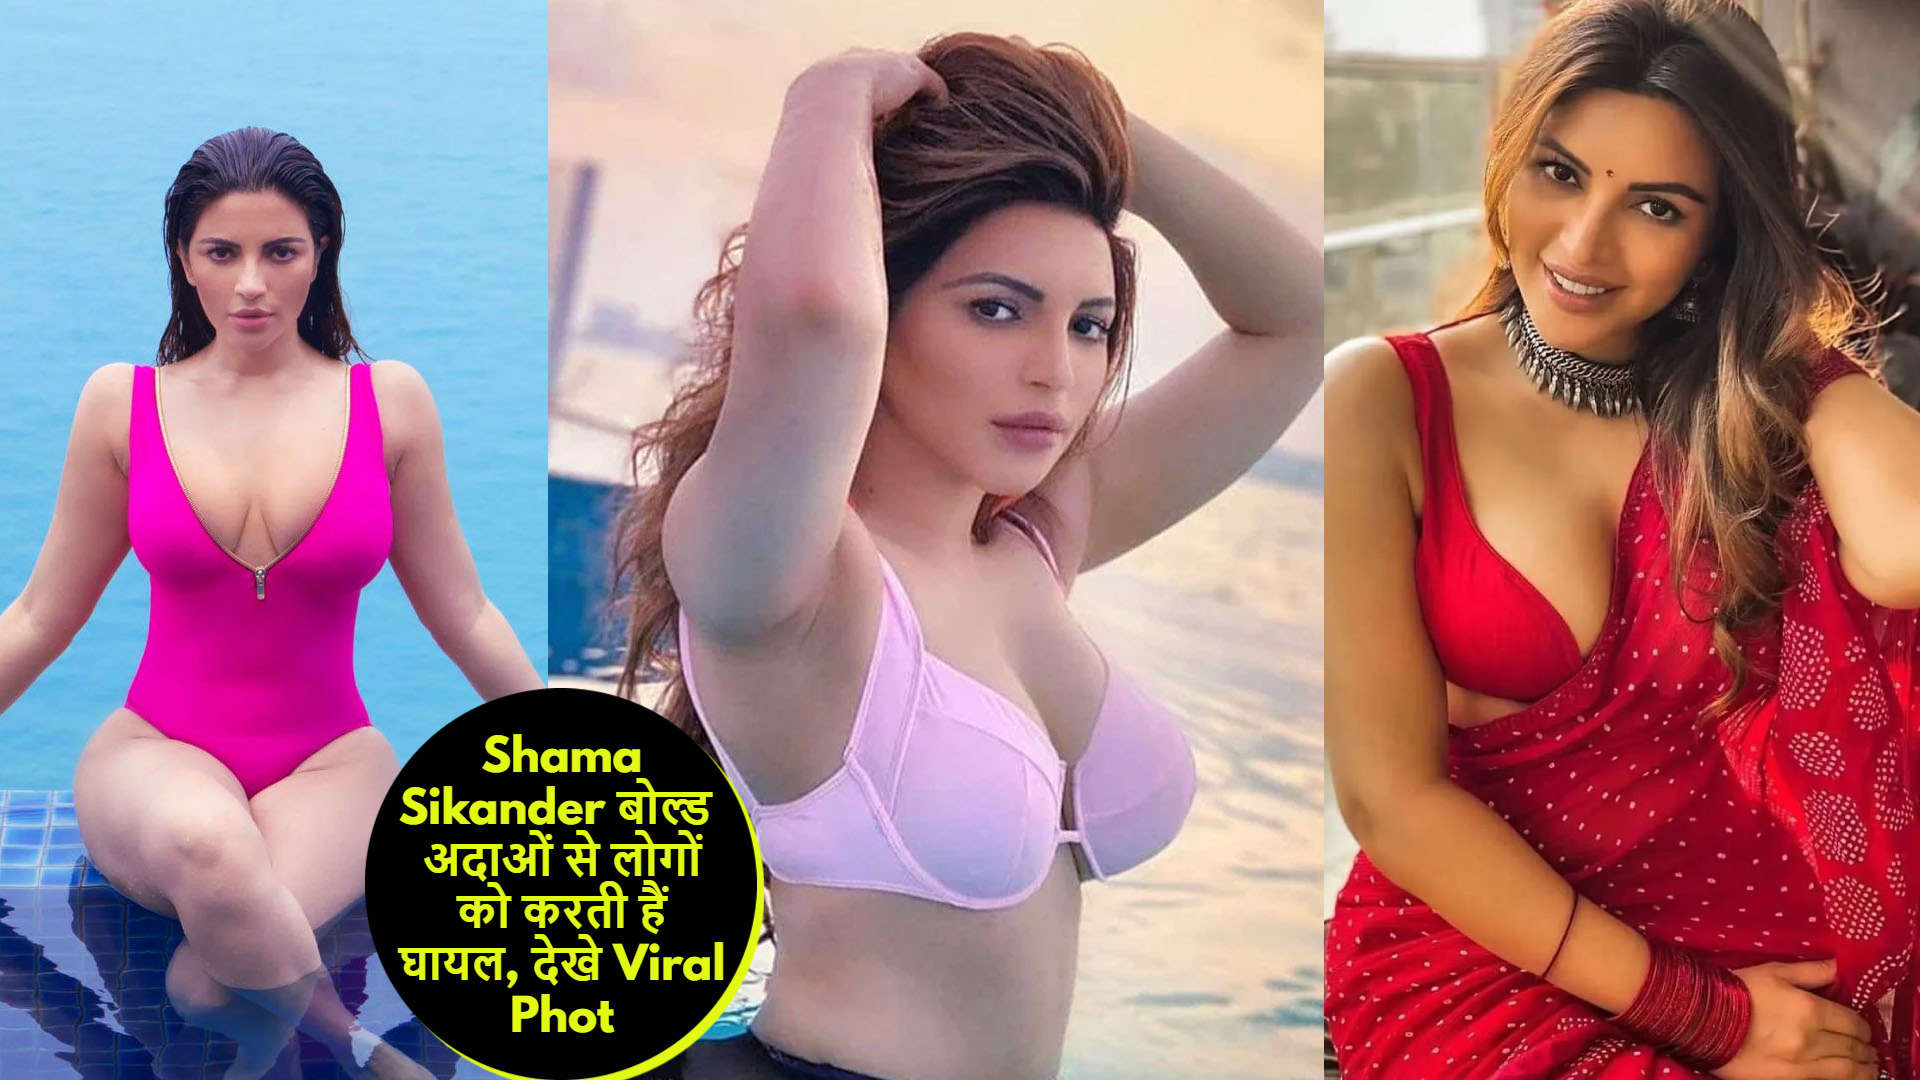 Shama Sikanders Dreamy Photoshoot From Venice Is Going Viral  View Pics